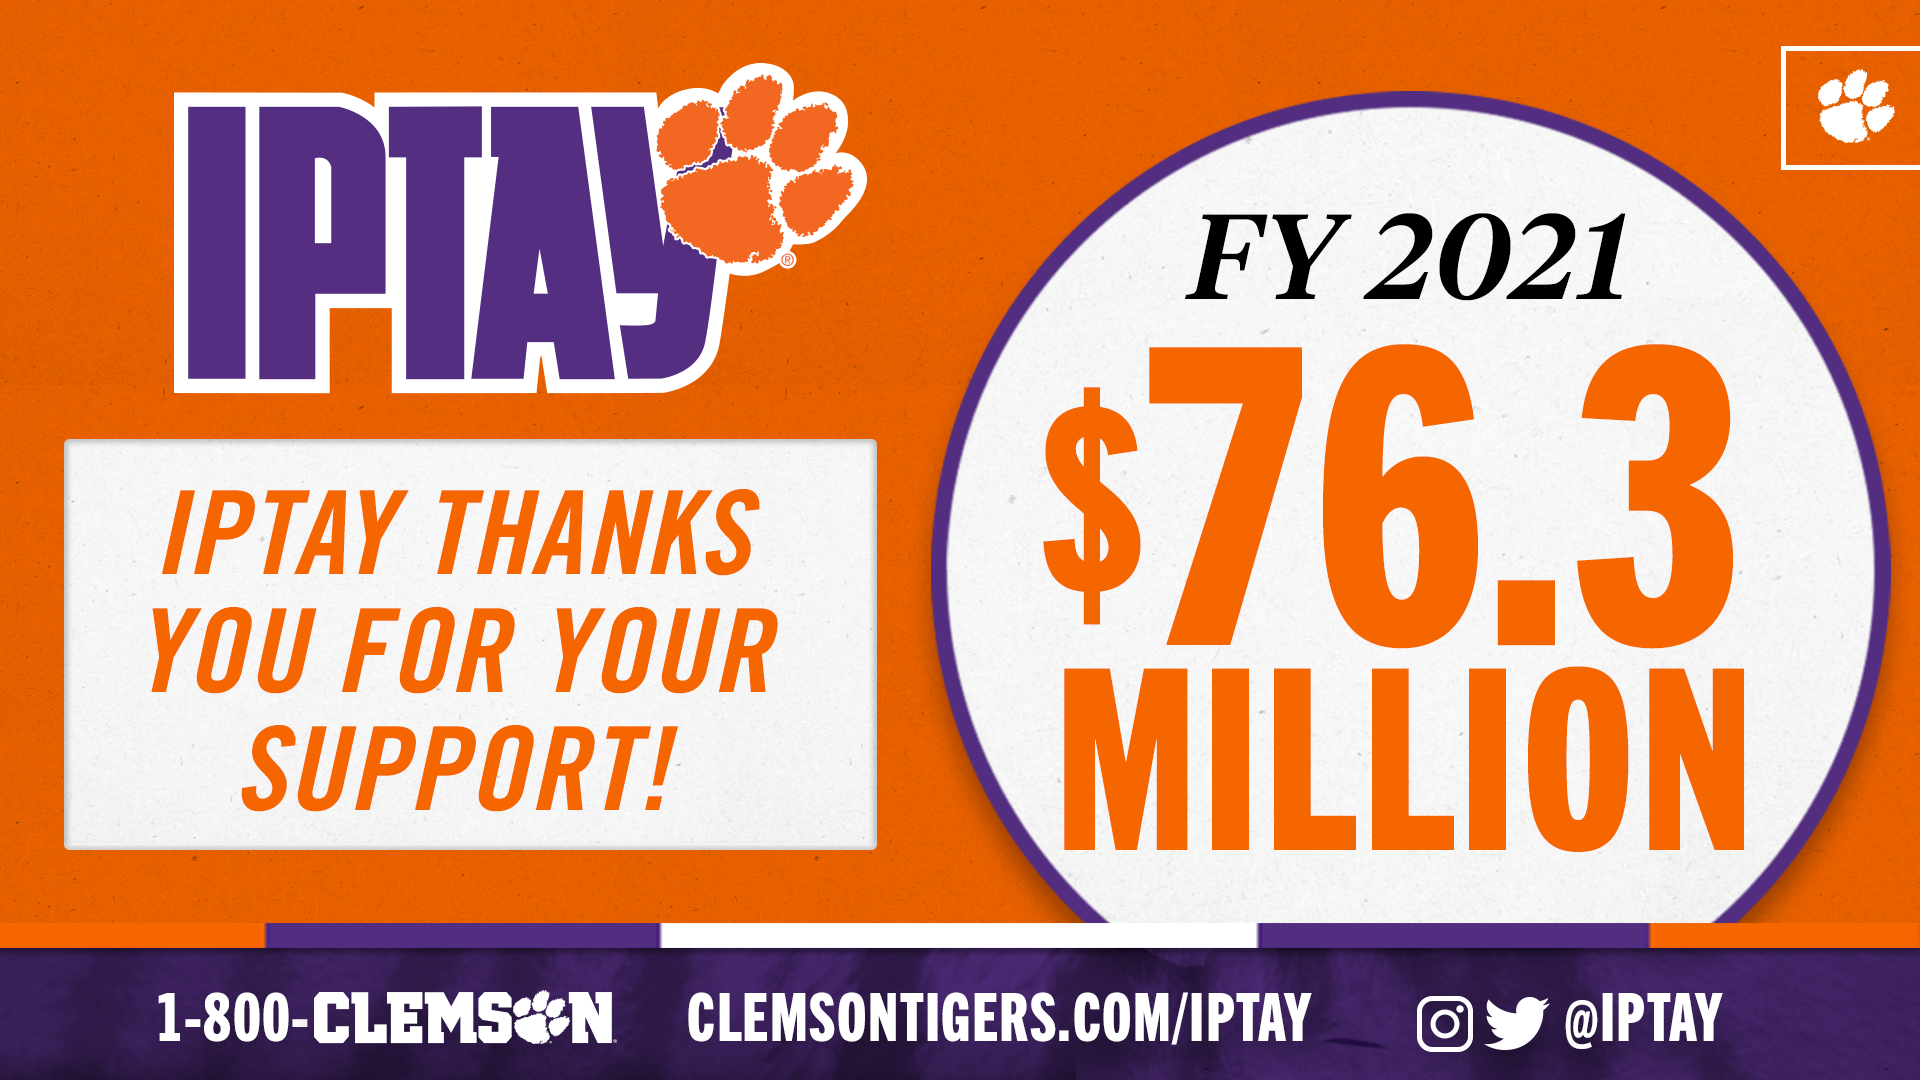 IPTAY Closes 2021 Year With Record 76.3M In Contributions IPTAY